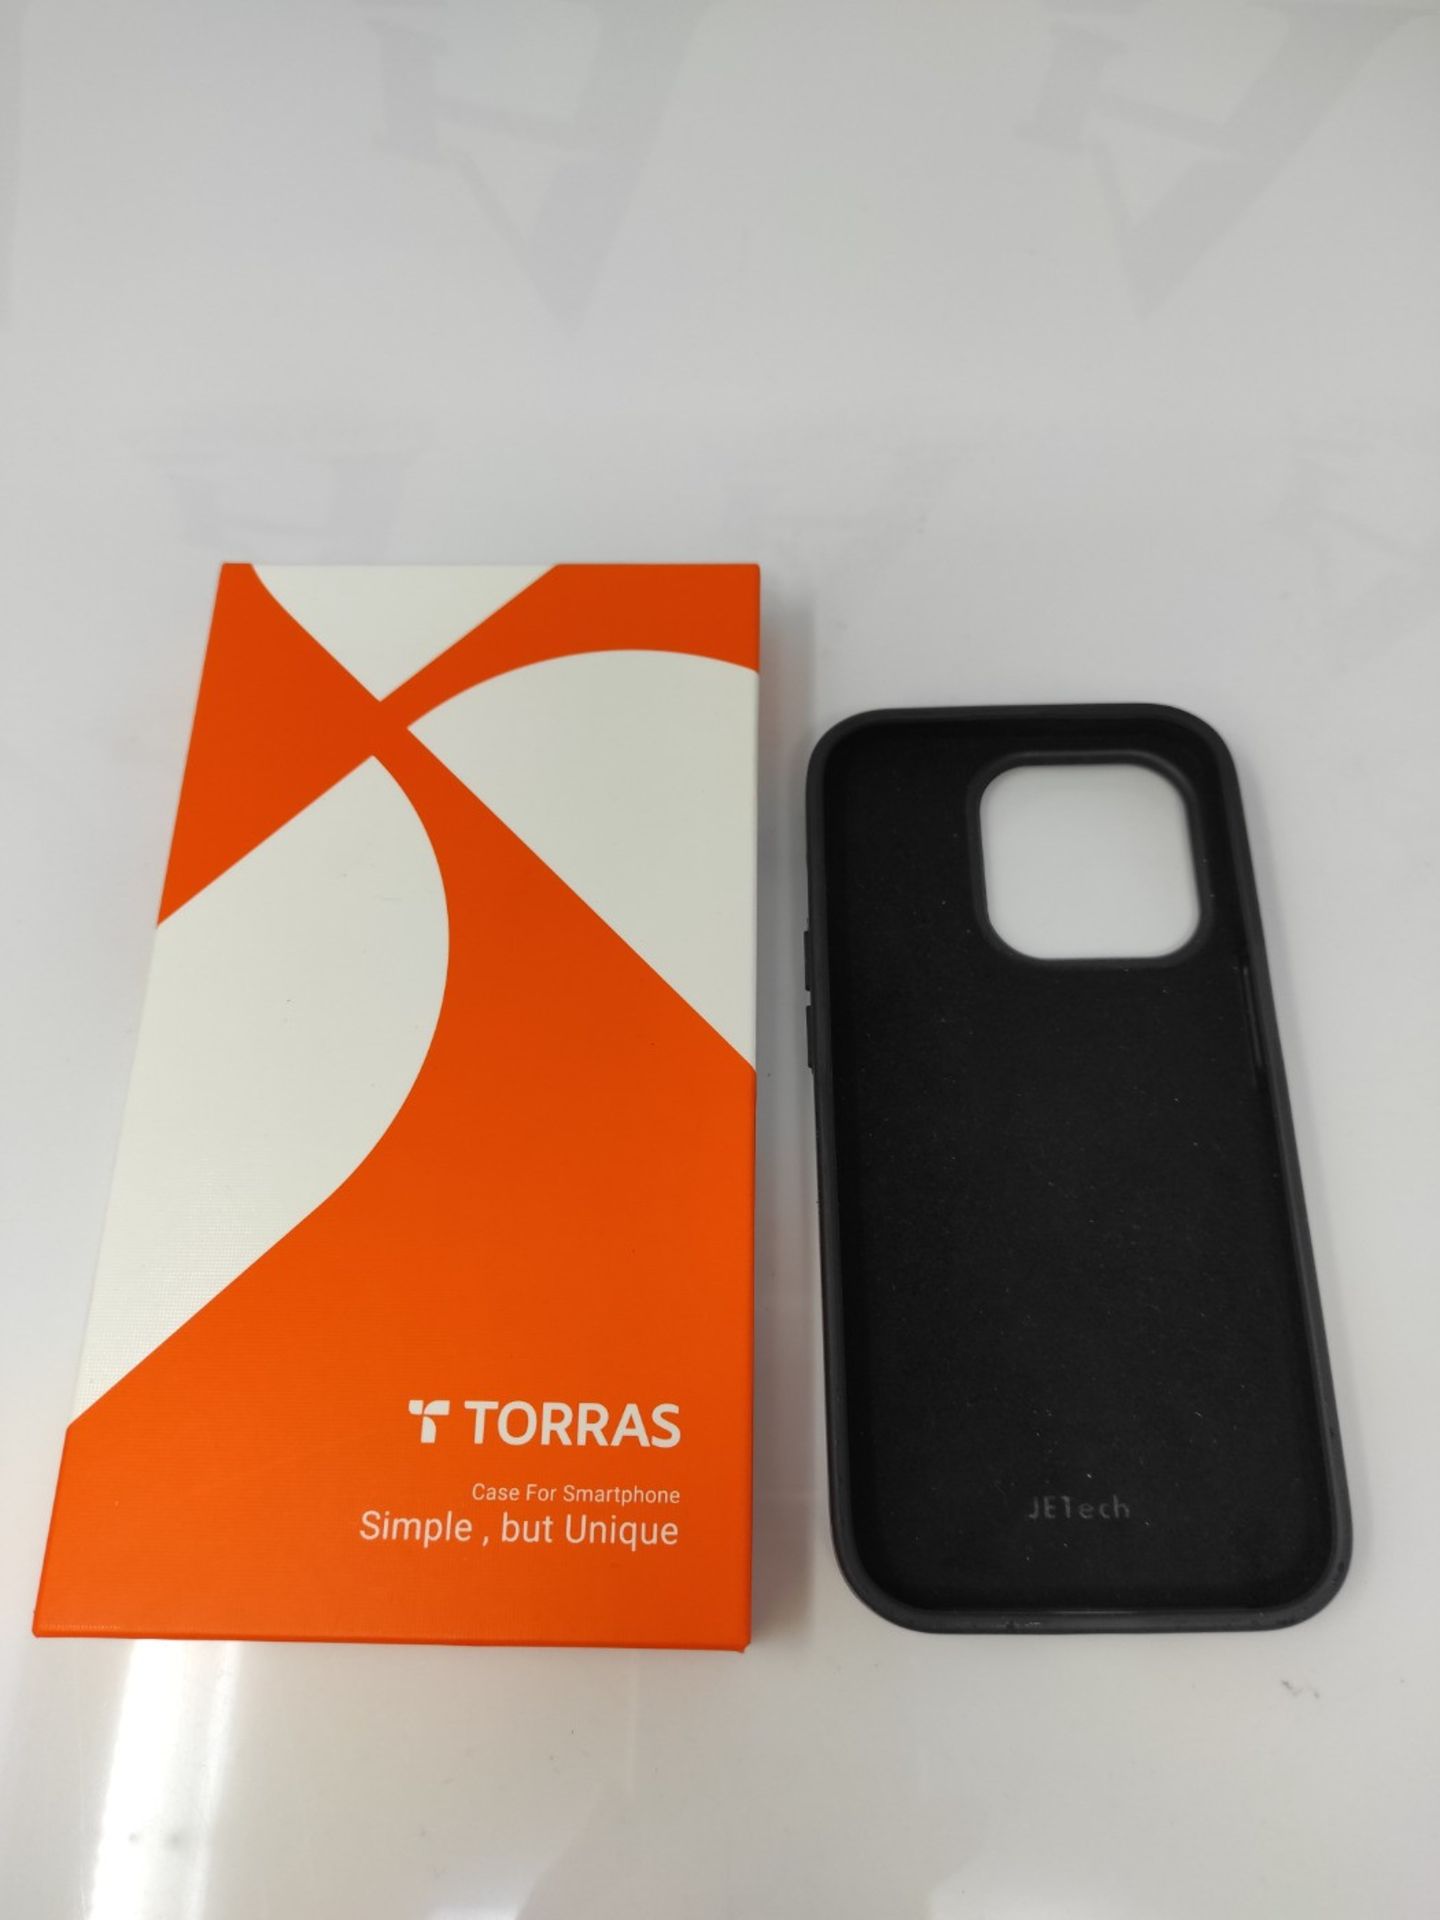 TORRAS Black Ultra Thin iPhone 14 Pro Case and Screen Protector [Tough Protective at T - Image 2 of 2